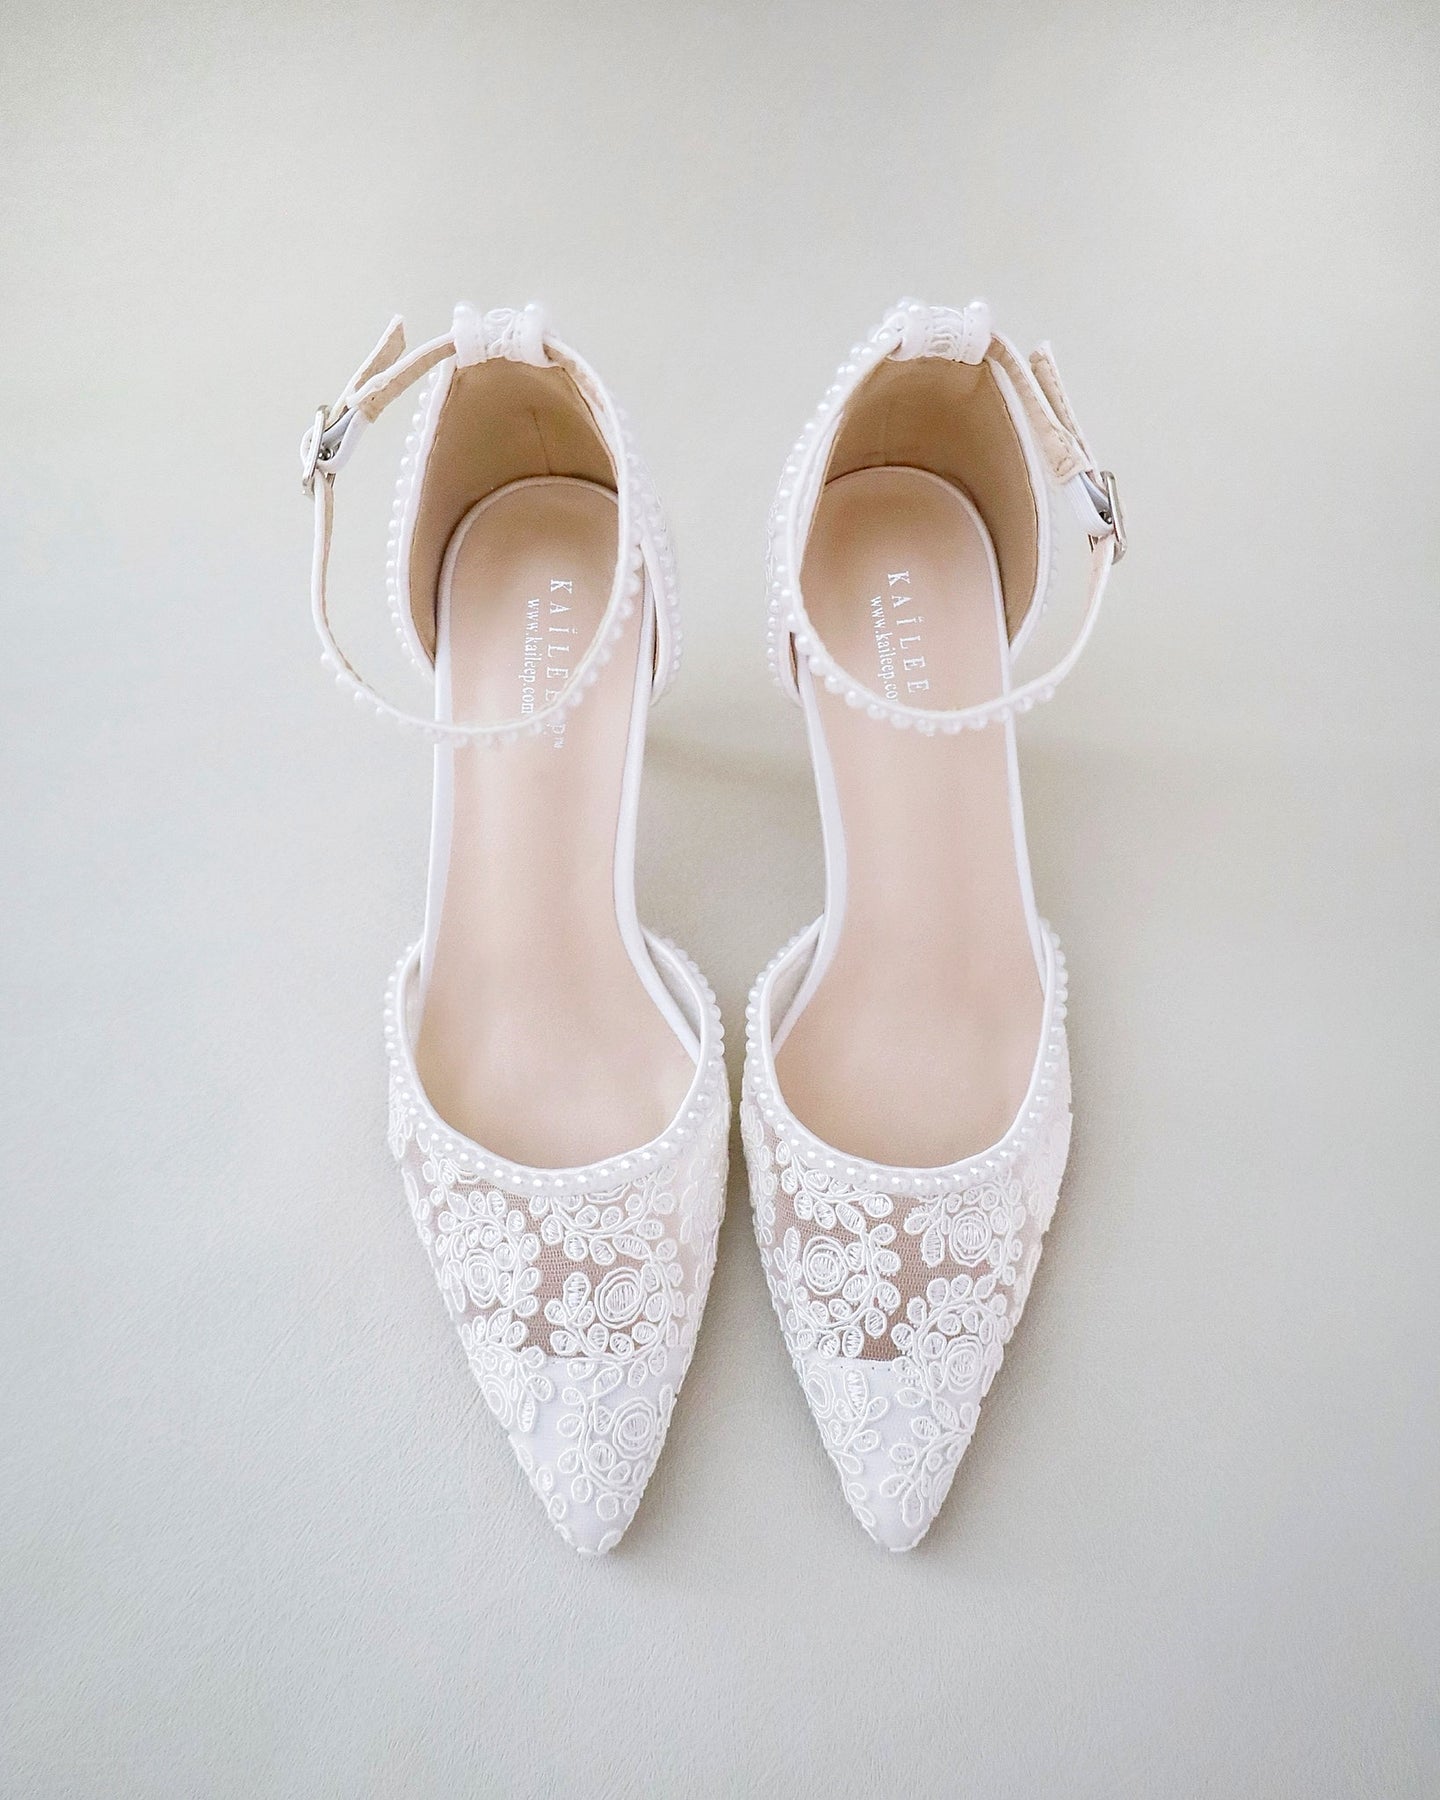 Wedding Shoes for Brides and Bridesmaids, Women Shoes, Party Shoes ...